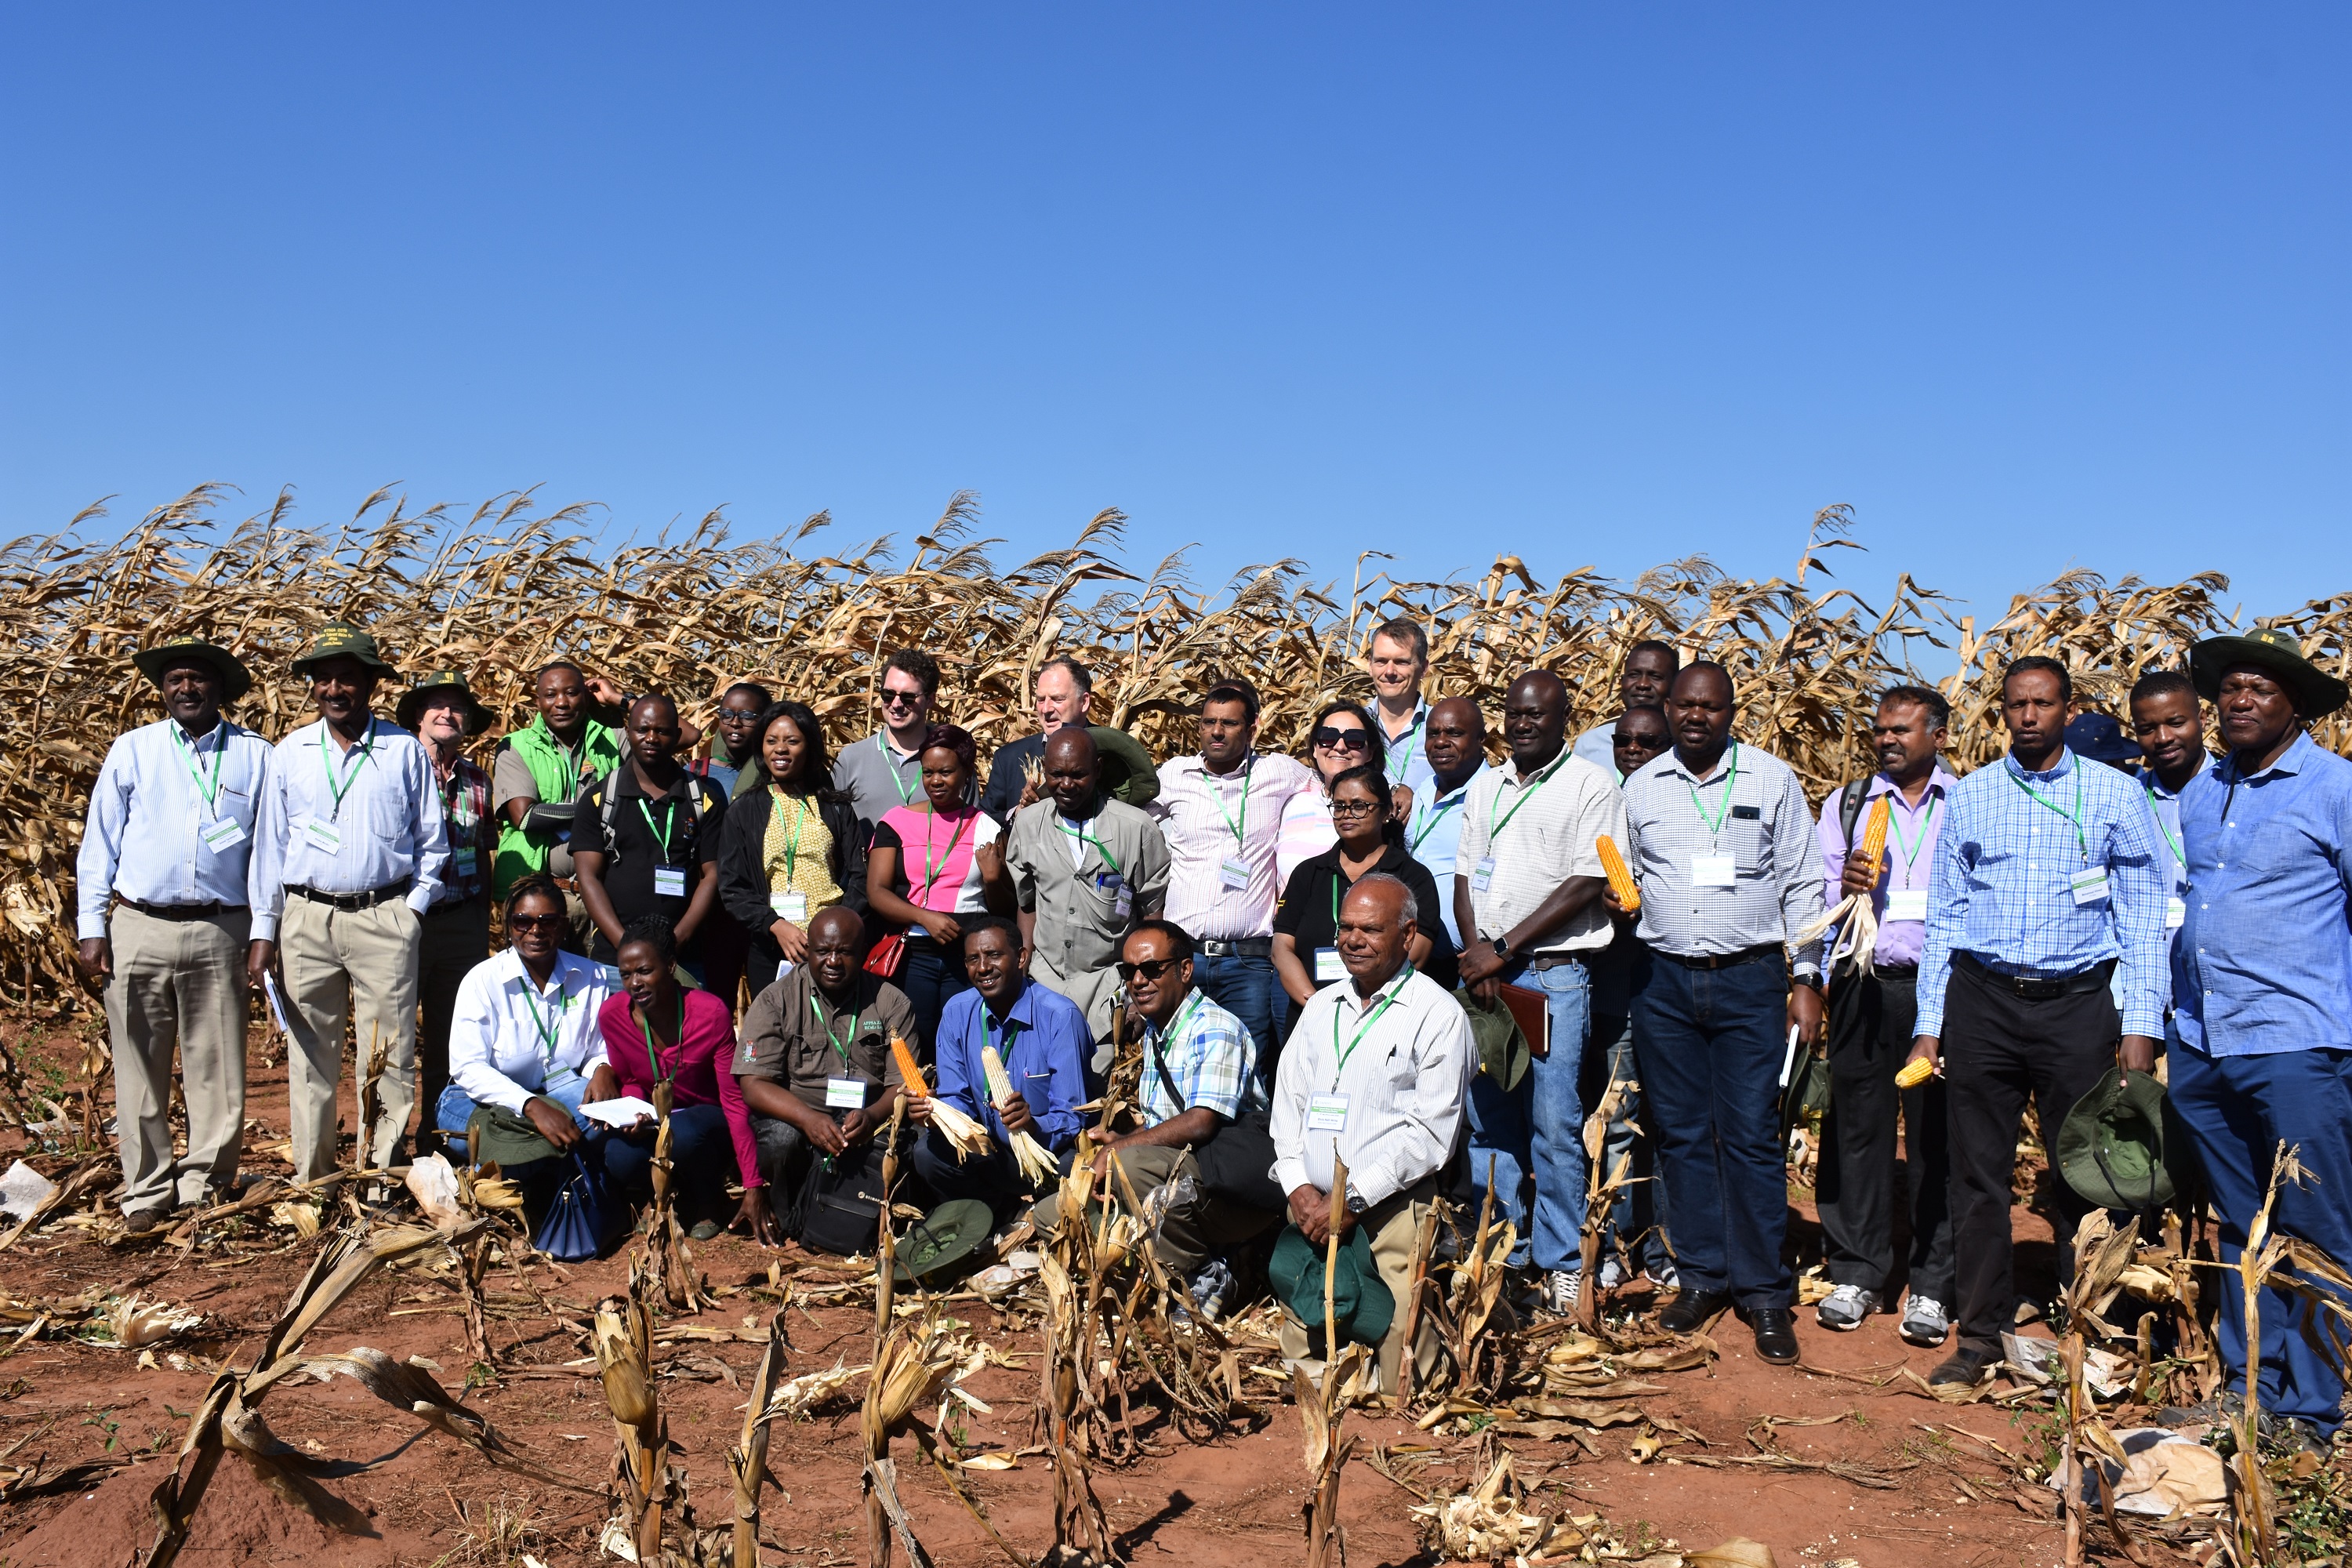 STMA meeting participants pose for a group photo during a field visit to seed company Zamseeds. (Photo: Jerome Bossuet/CIMMYT)